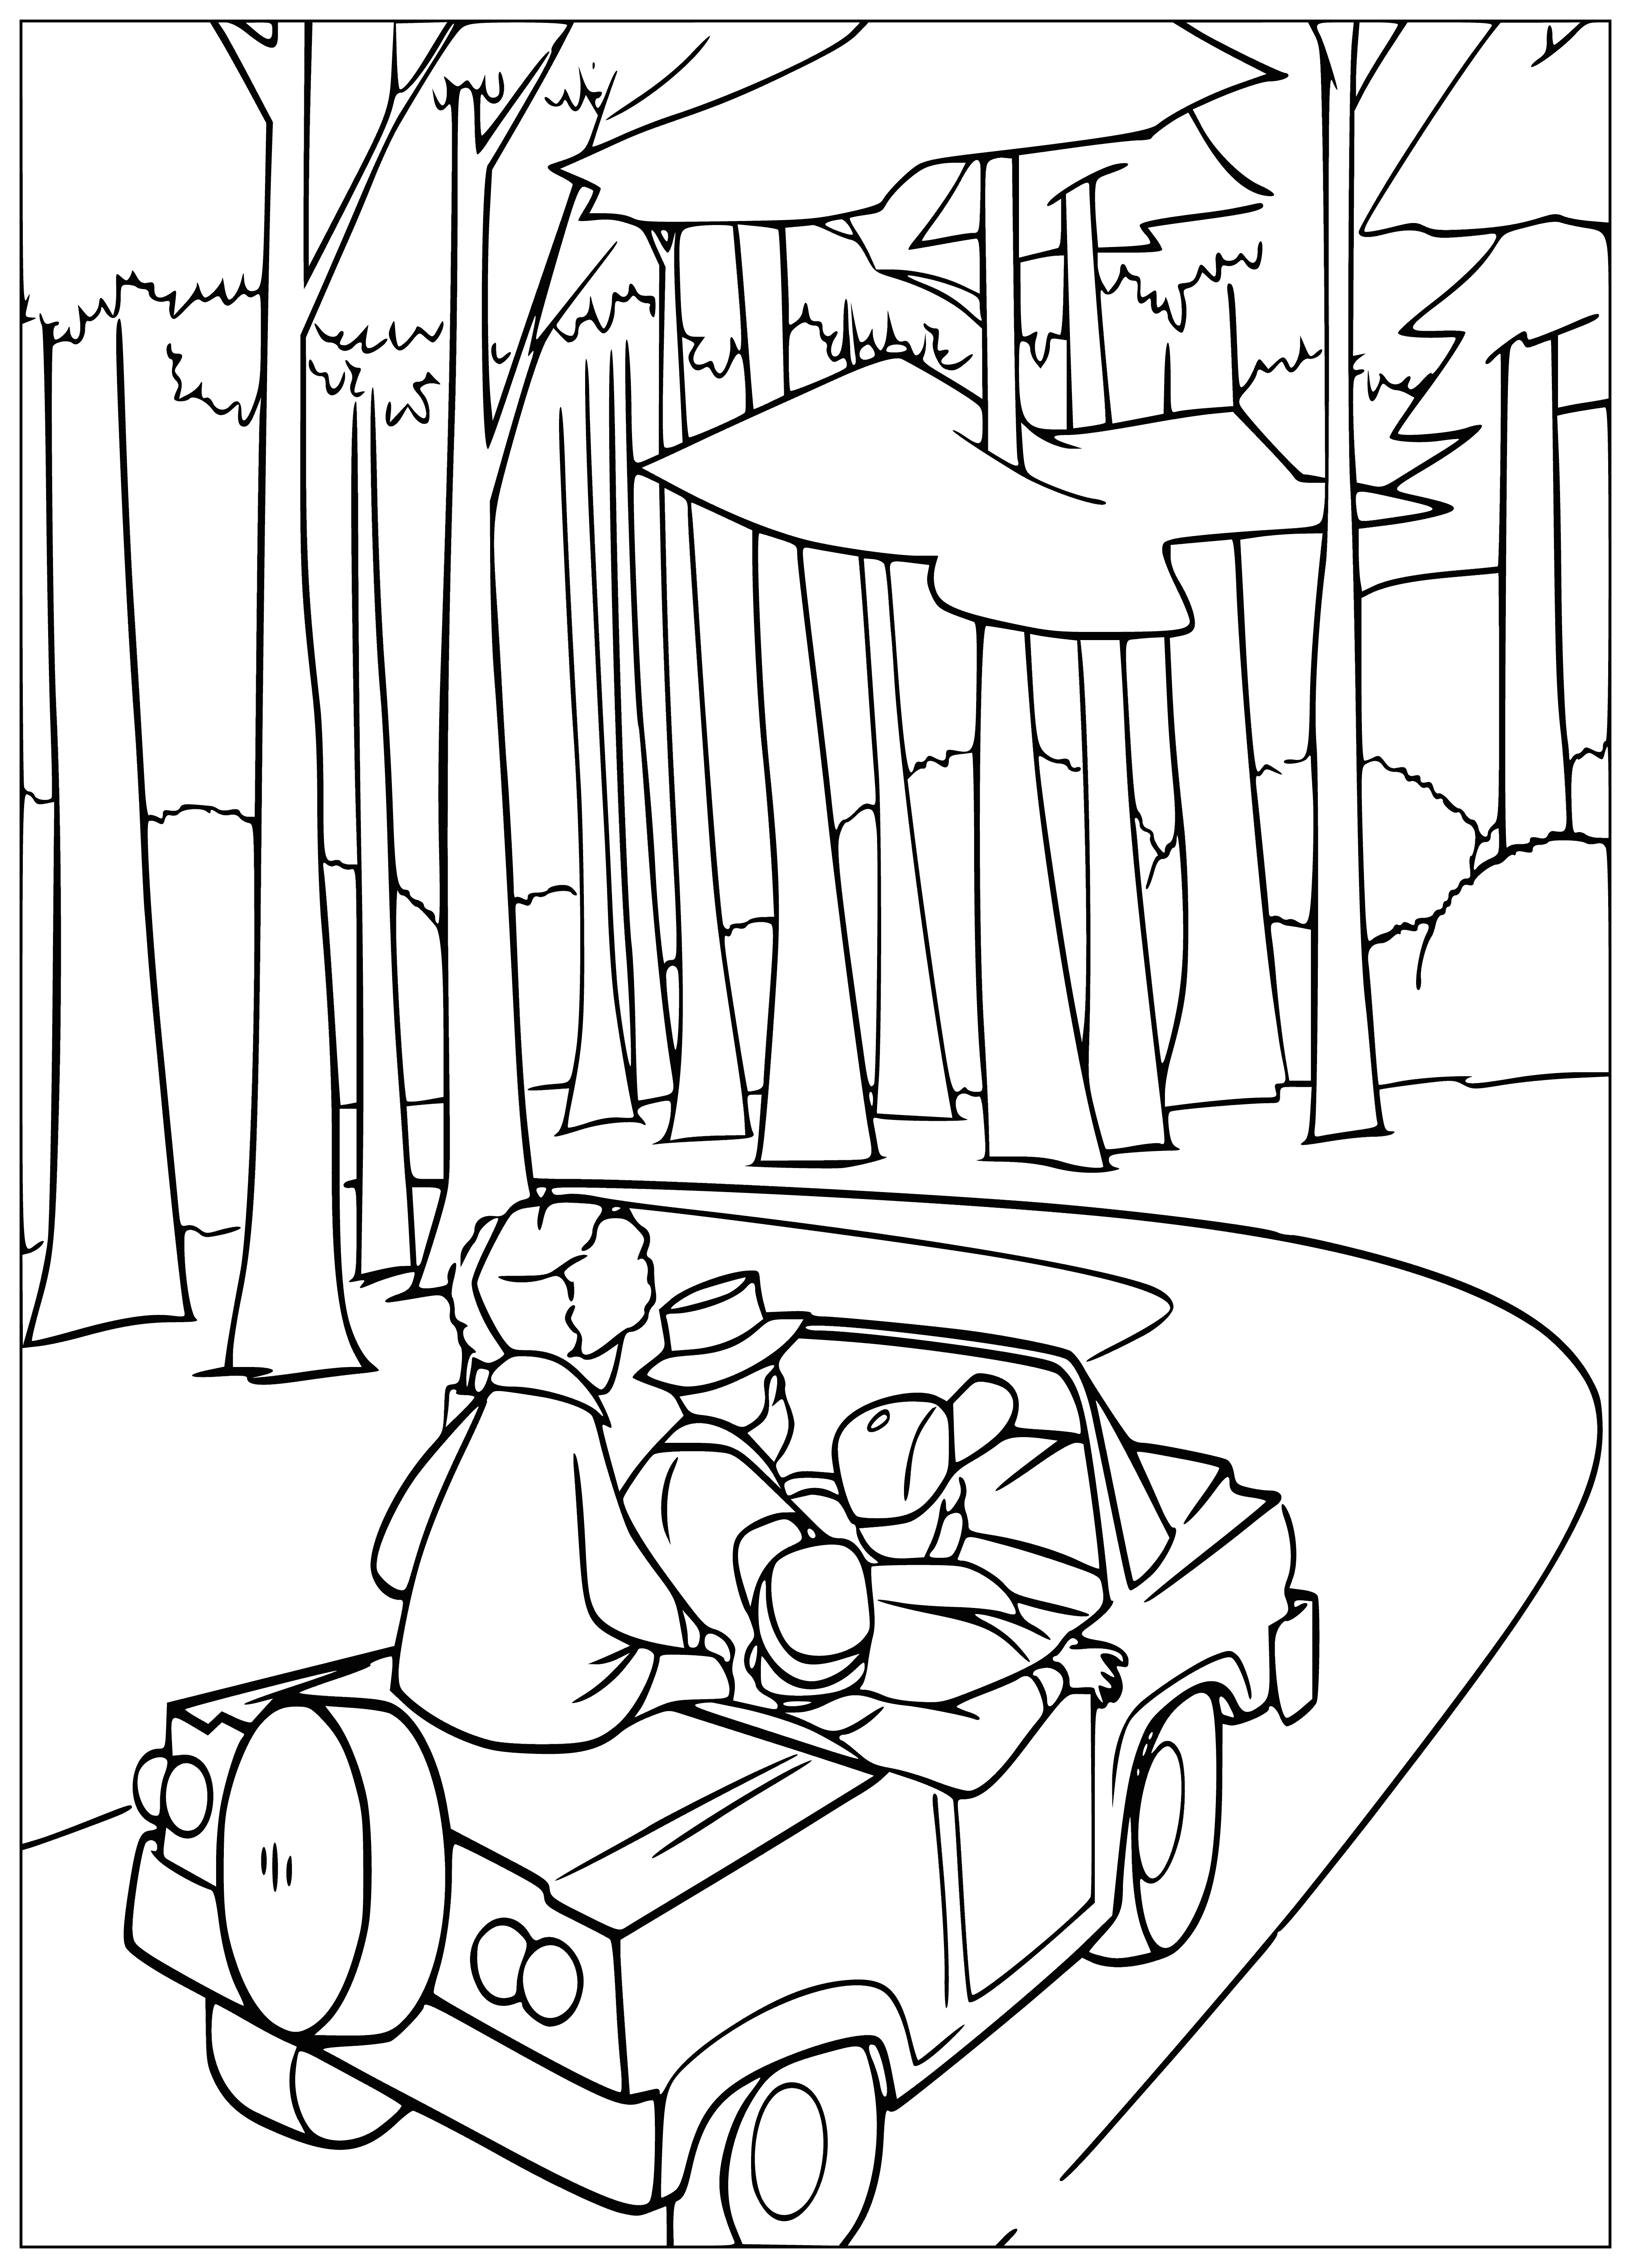 coloring page: A forest in the mountains w/ evergreen trees, snow, a river, bridge, field w/fence, deer & a hunter w/rifle. #ColoringPage